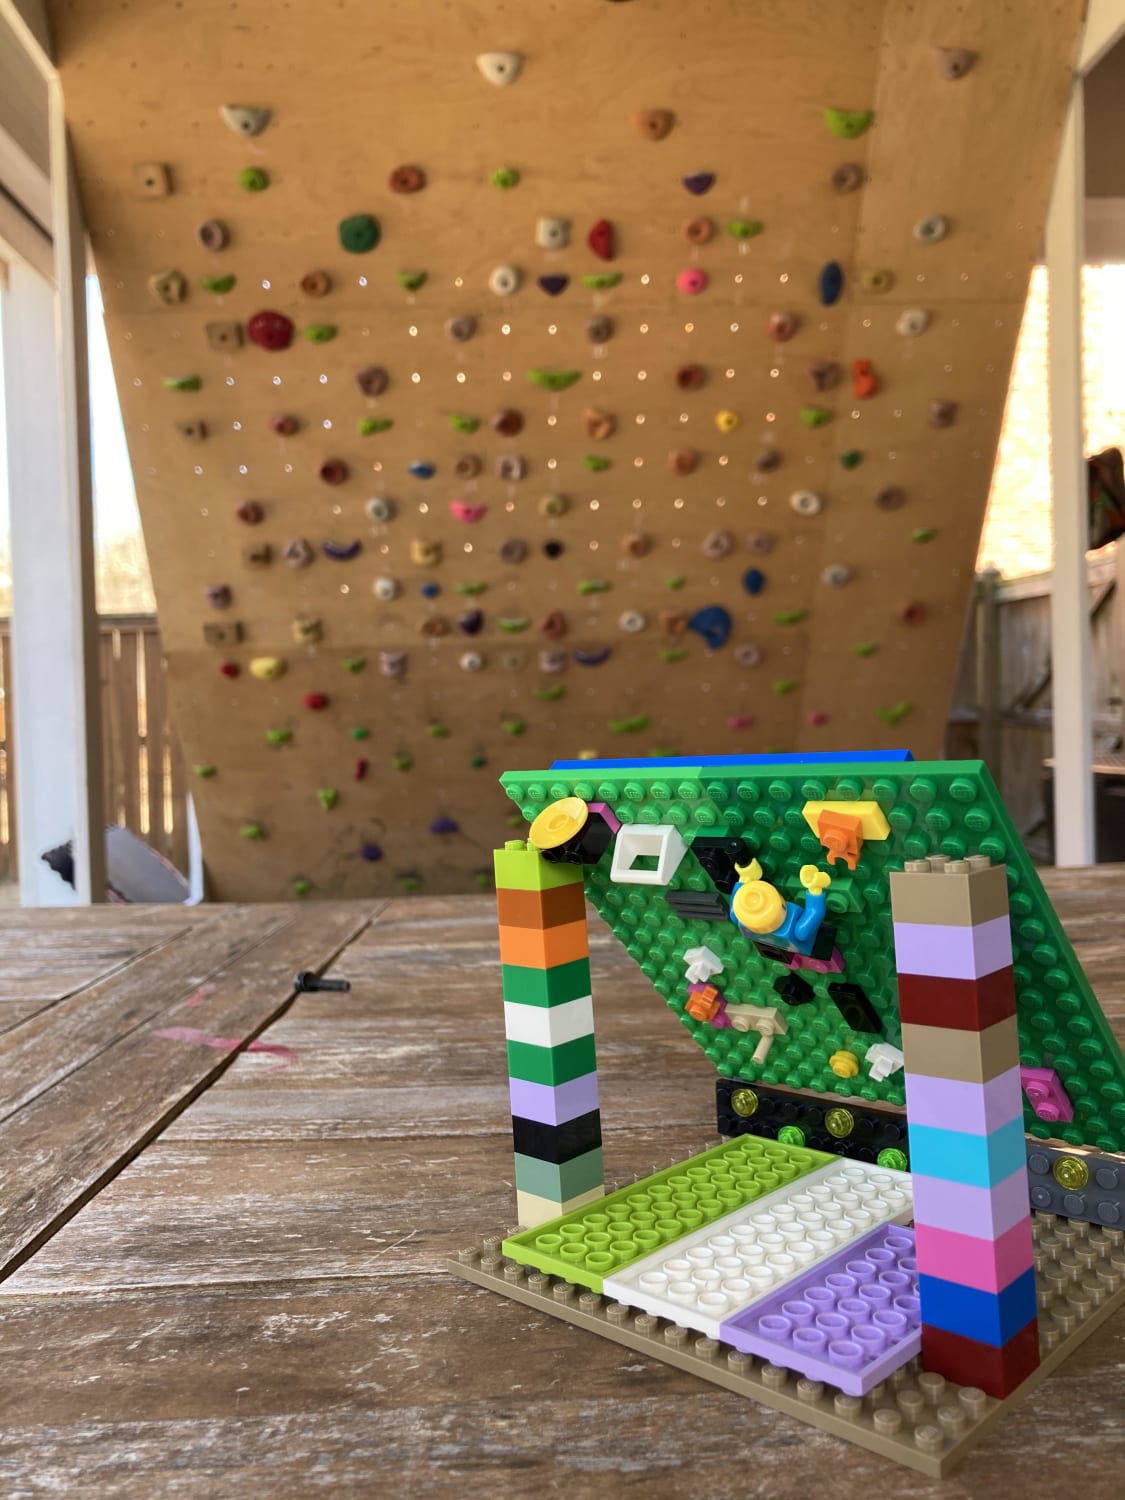 3 year old wanted to play Legos instead of climb with me. Passive aggressively made him this. Still didn’t want to climb :(